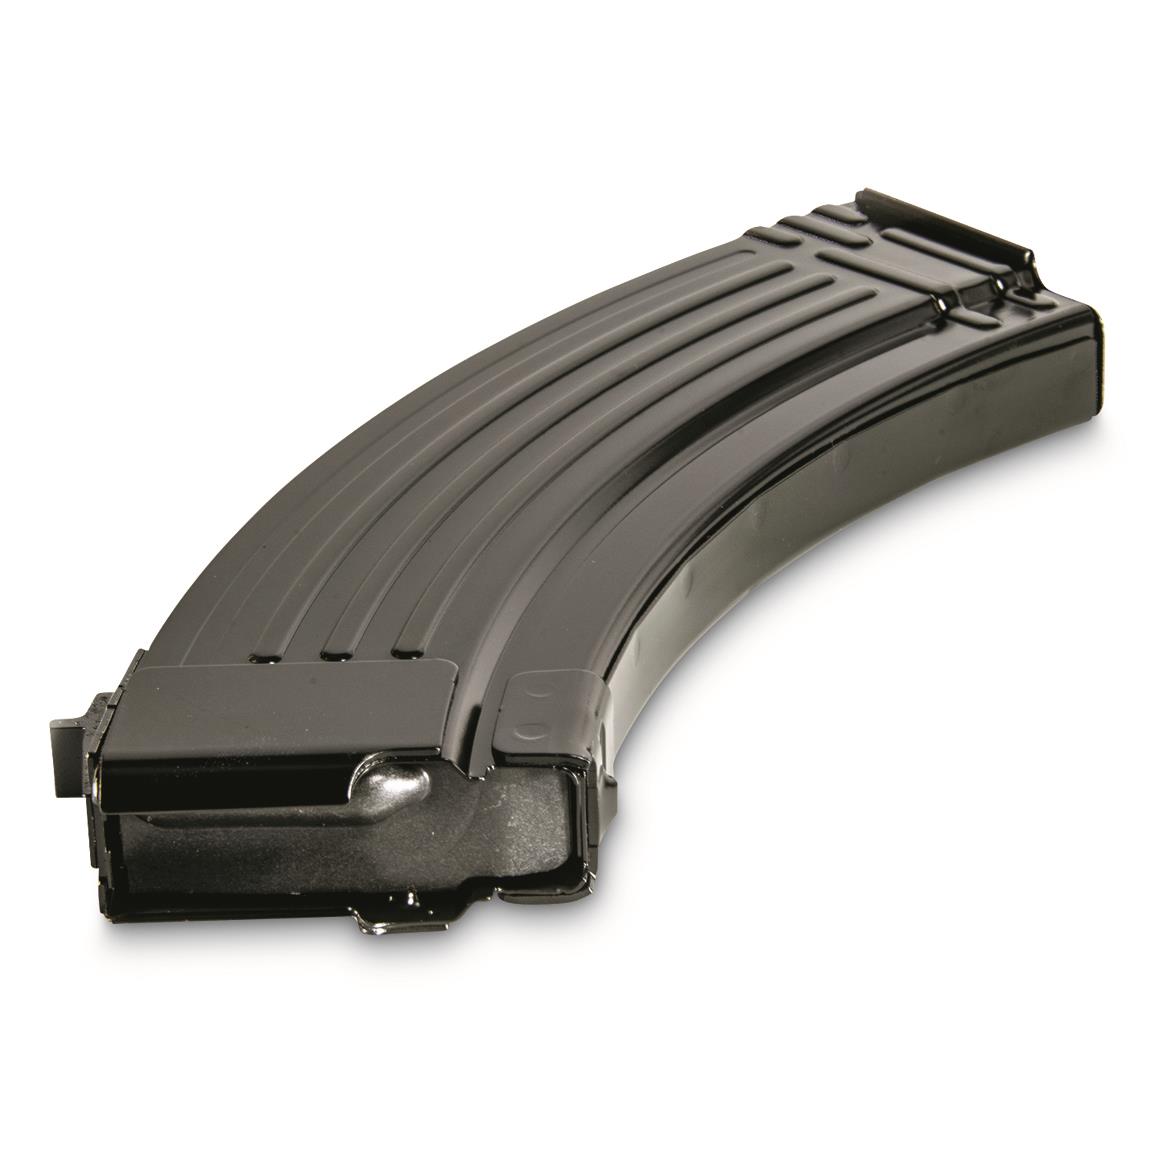 SGM Tactical, Steel AK-47 Magazine, 7.62x39mm, 30 Rounds - $13.49. 